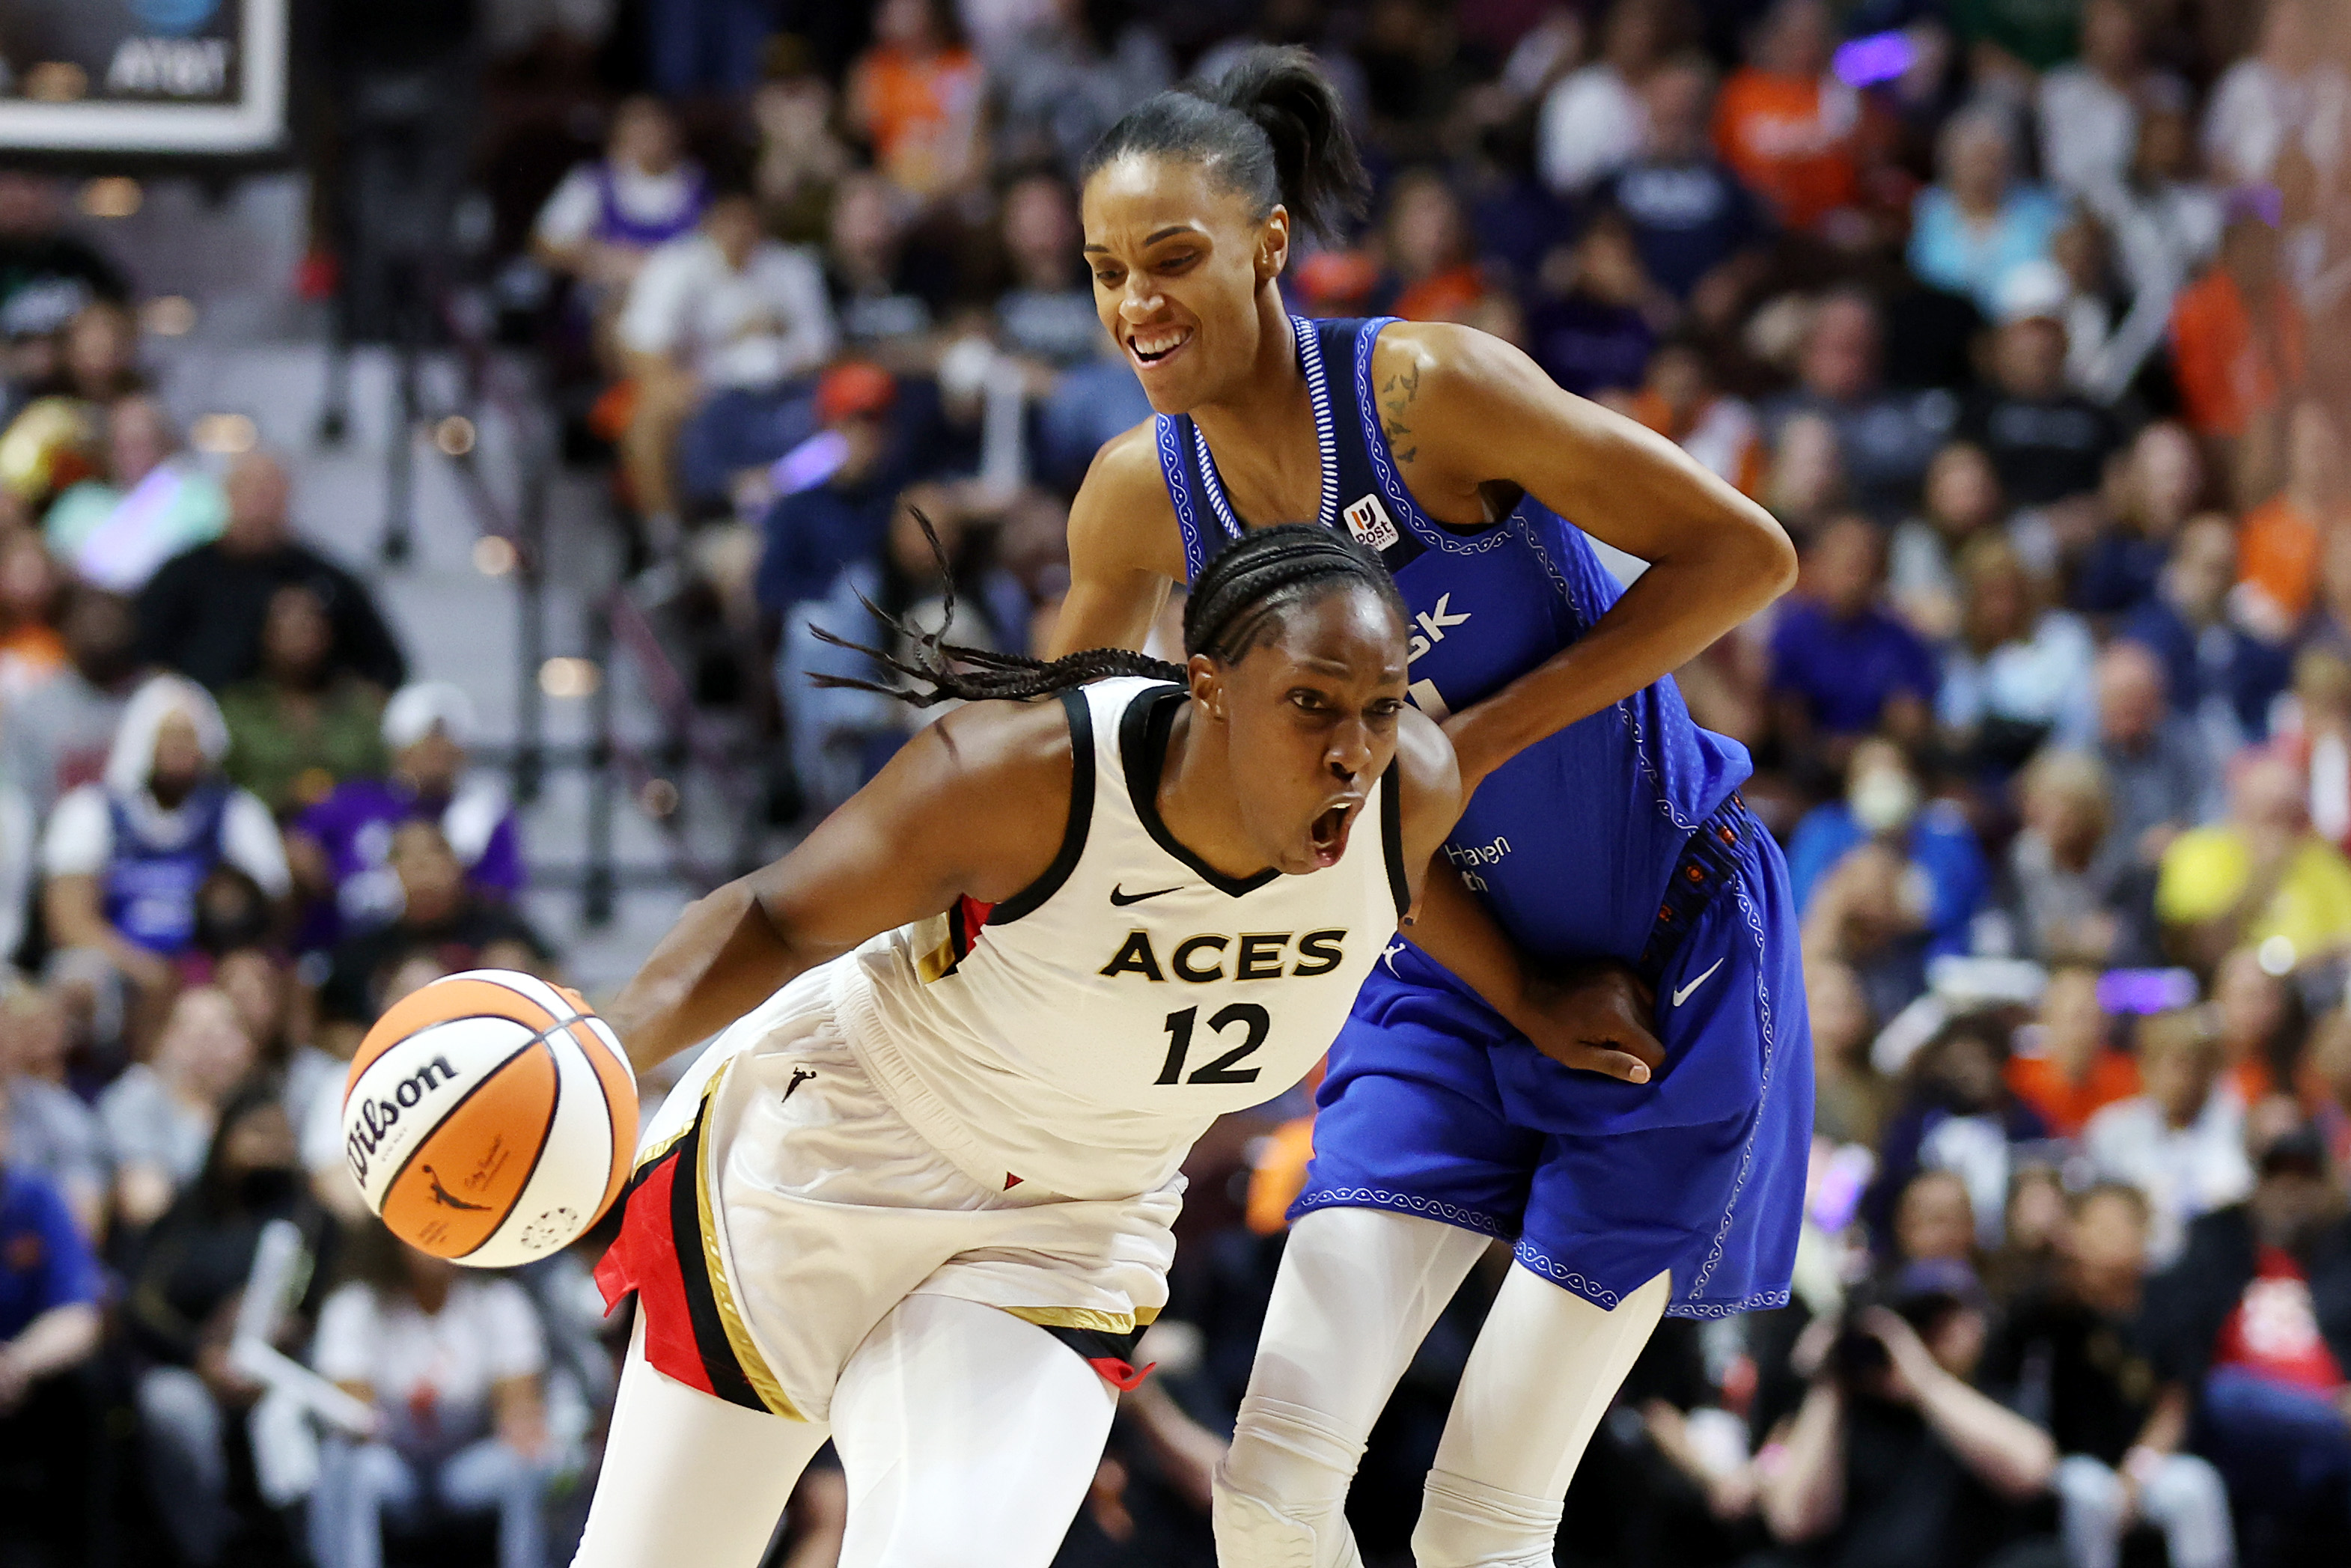 Chelsea Gray #12 of the Las Vegas Aces dribbles against DeWanna Bonner #24 of the Connecticut Sun in the first half during game four of the 2022 WNBA Finals at Mohegan Sun Arena on September 18, 2022 in Uncasville, Connecticut.